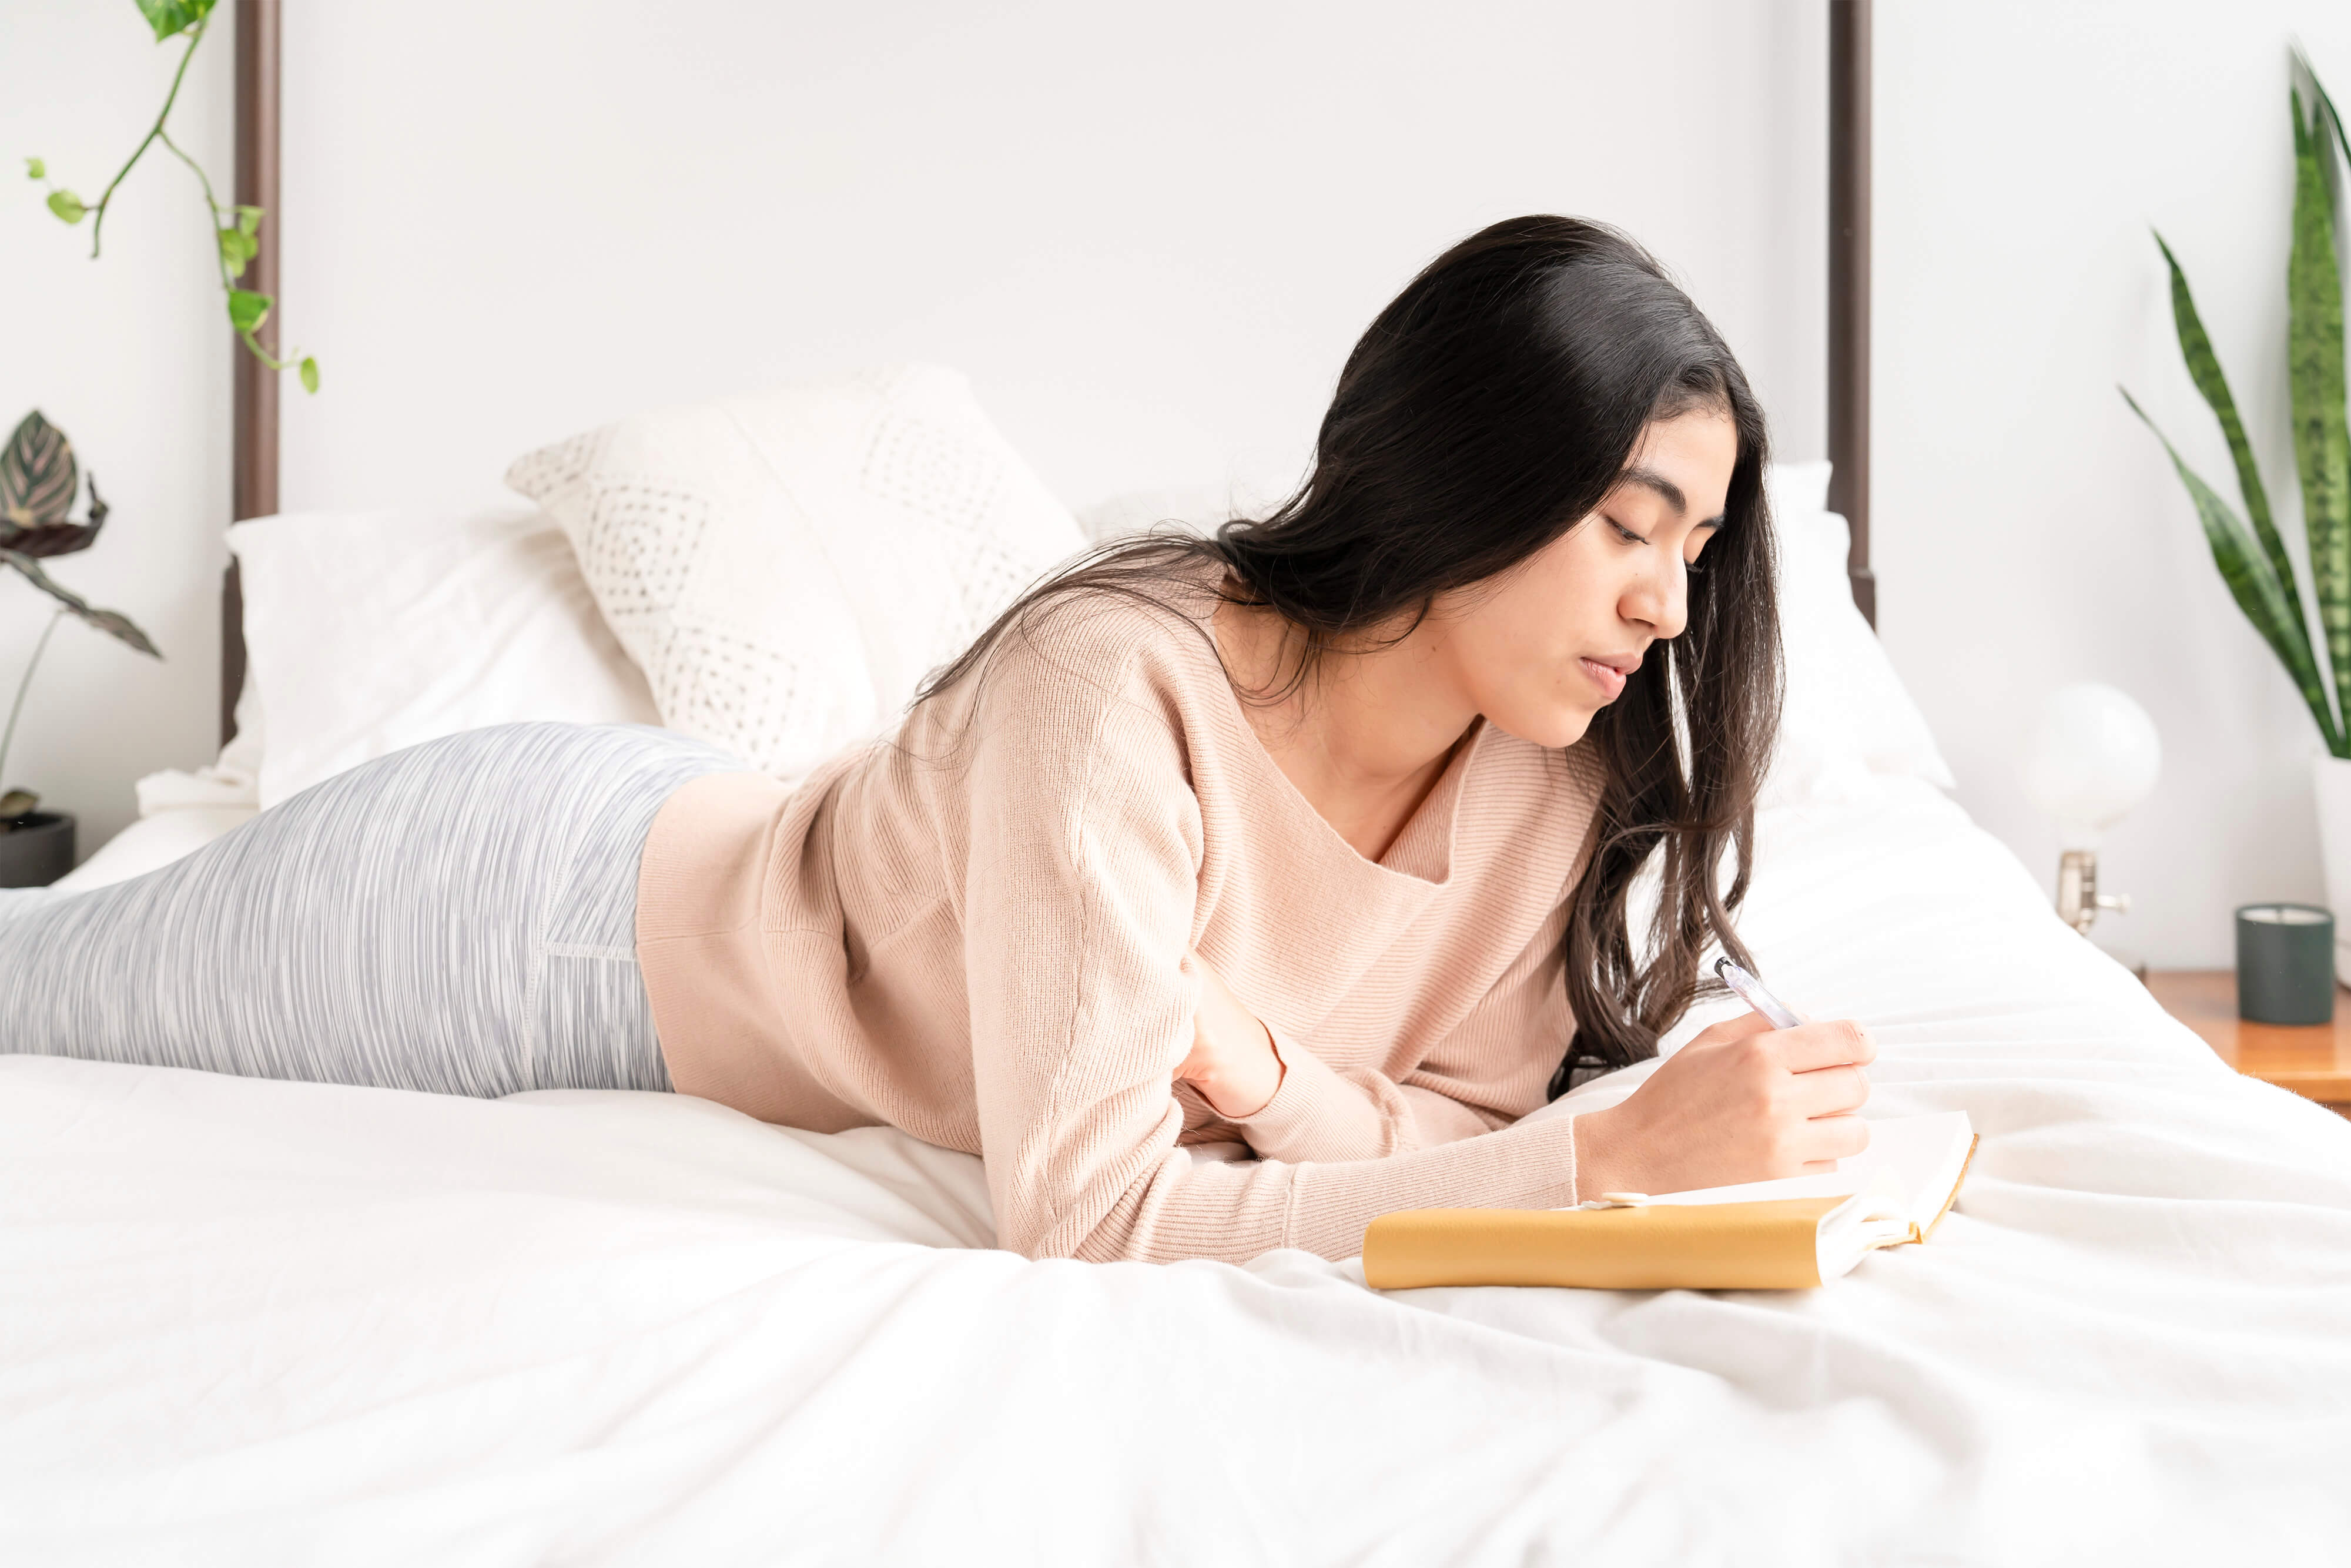 Woman lies on her stomach on a bed while writing in a journal.